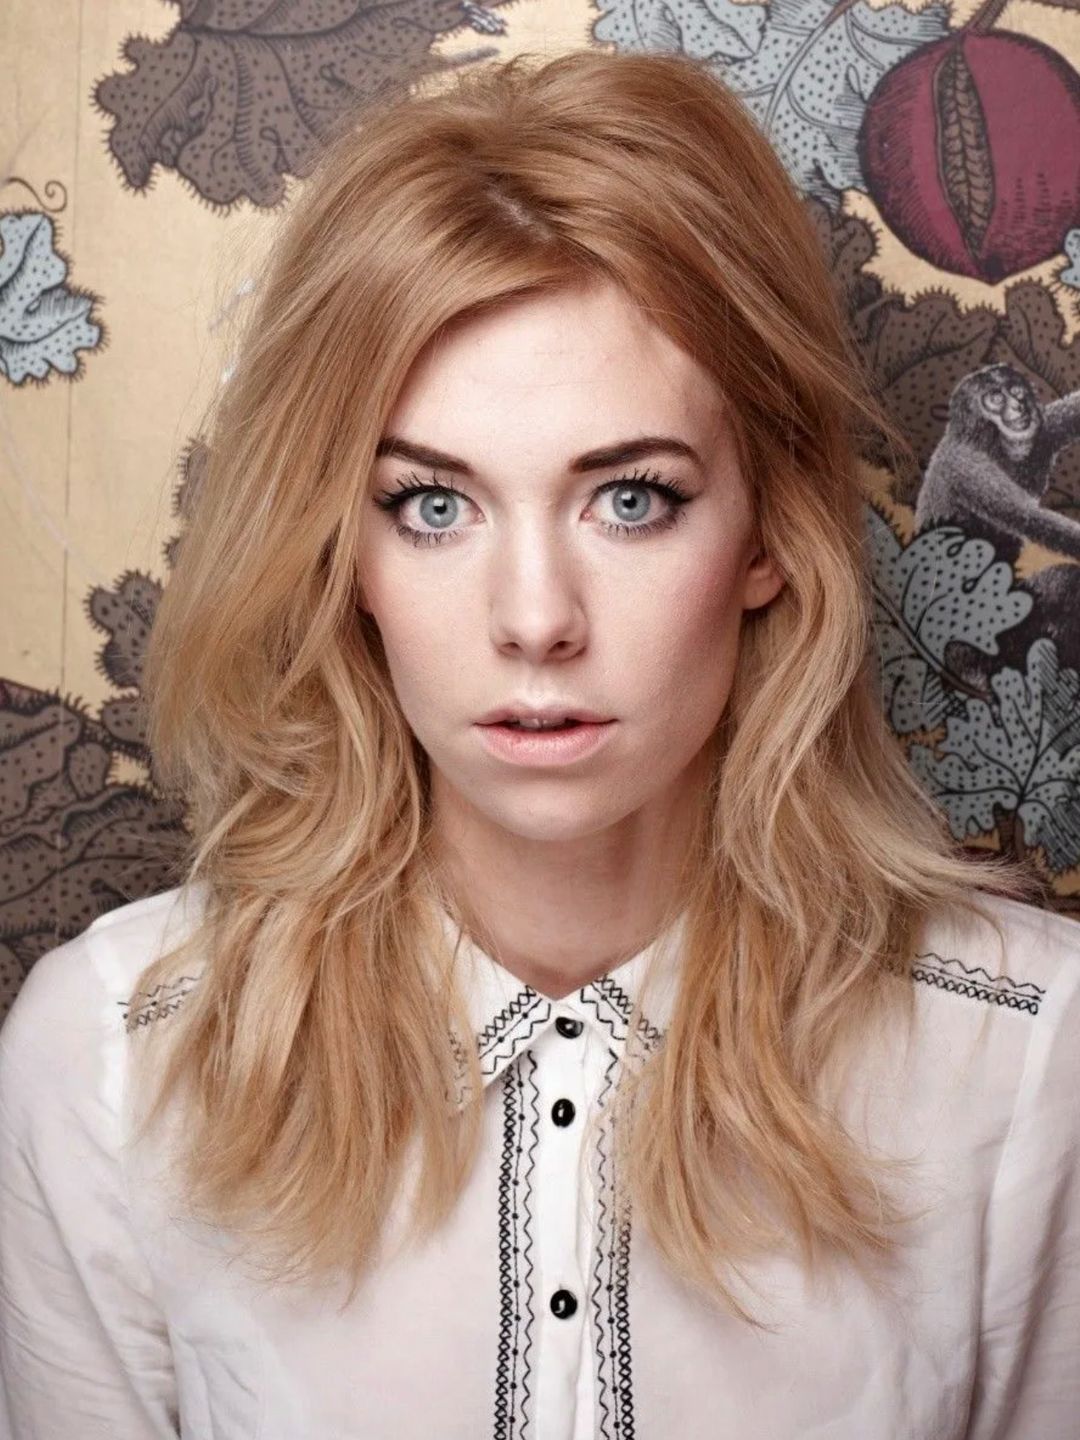 Vanessa Kirby in her youth